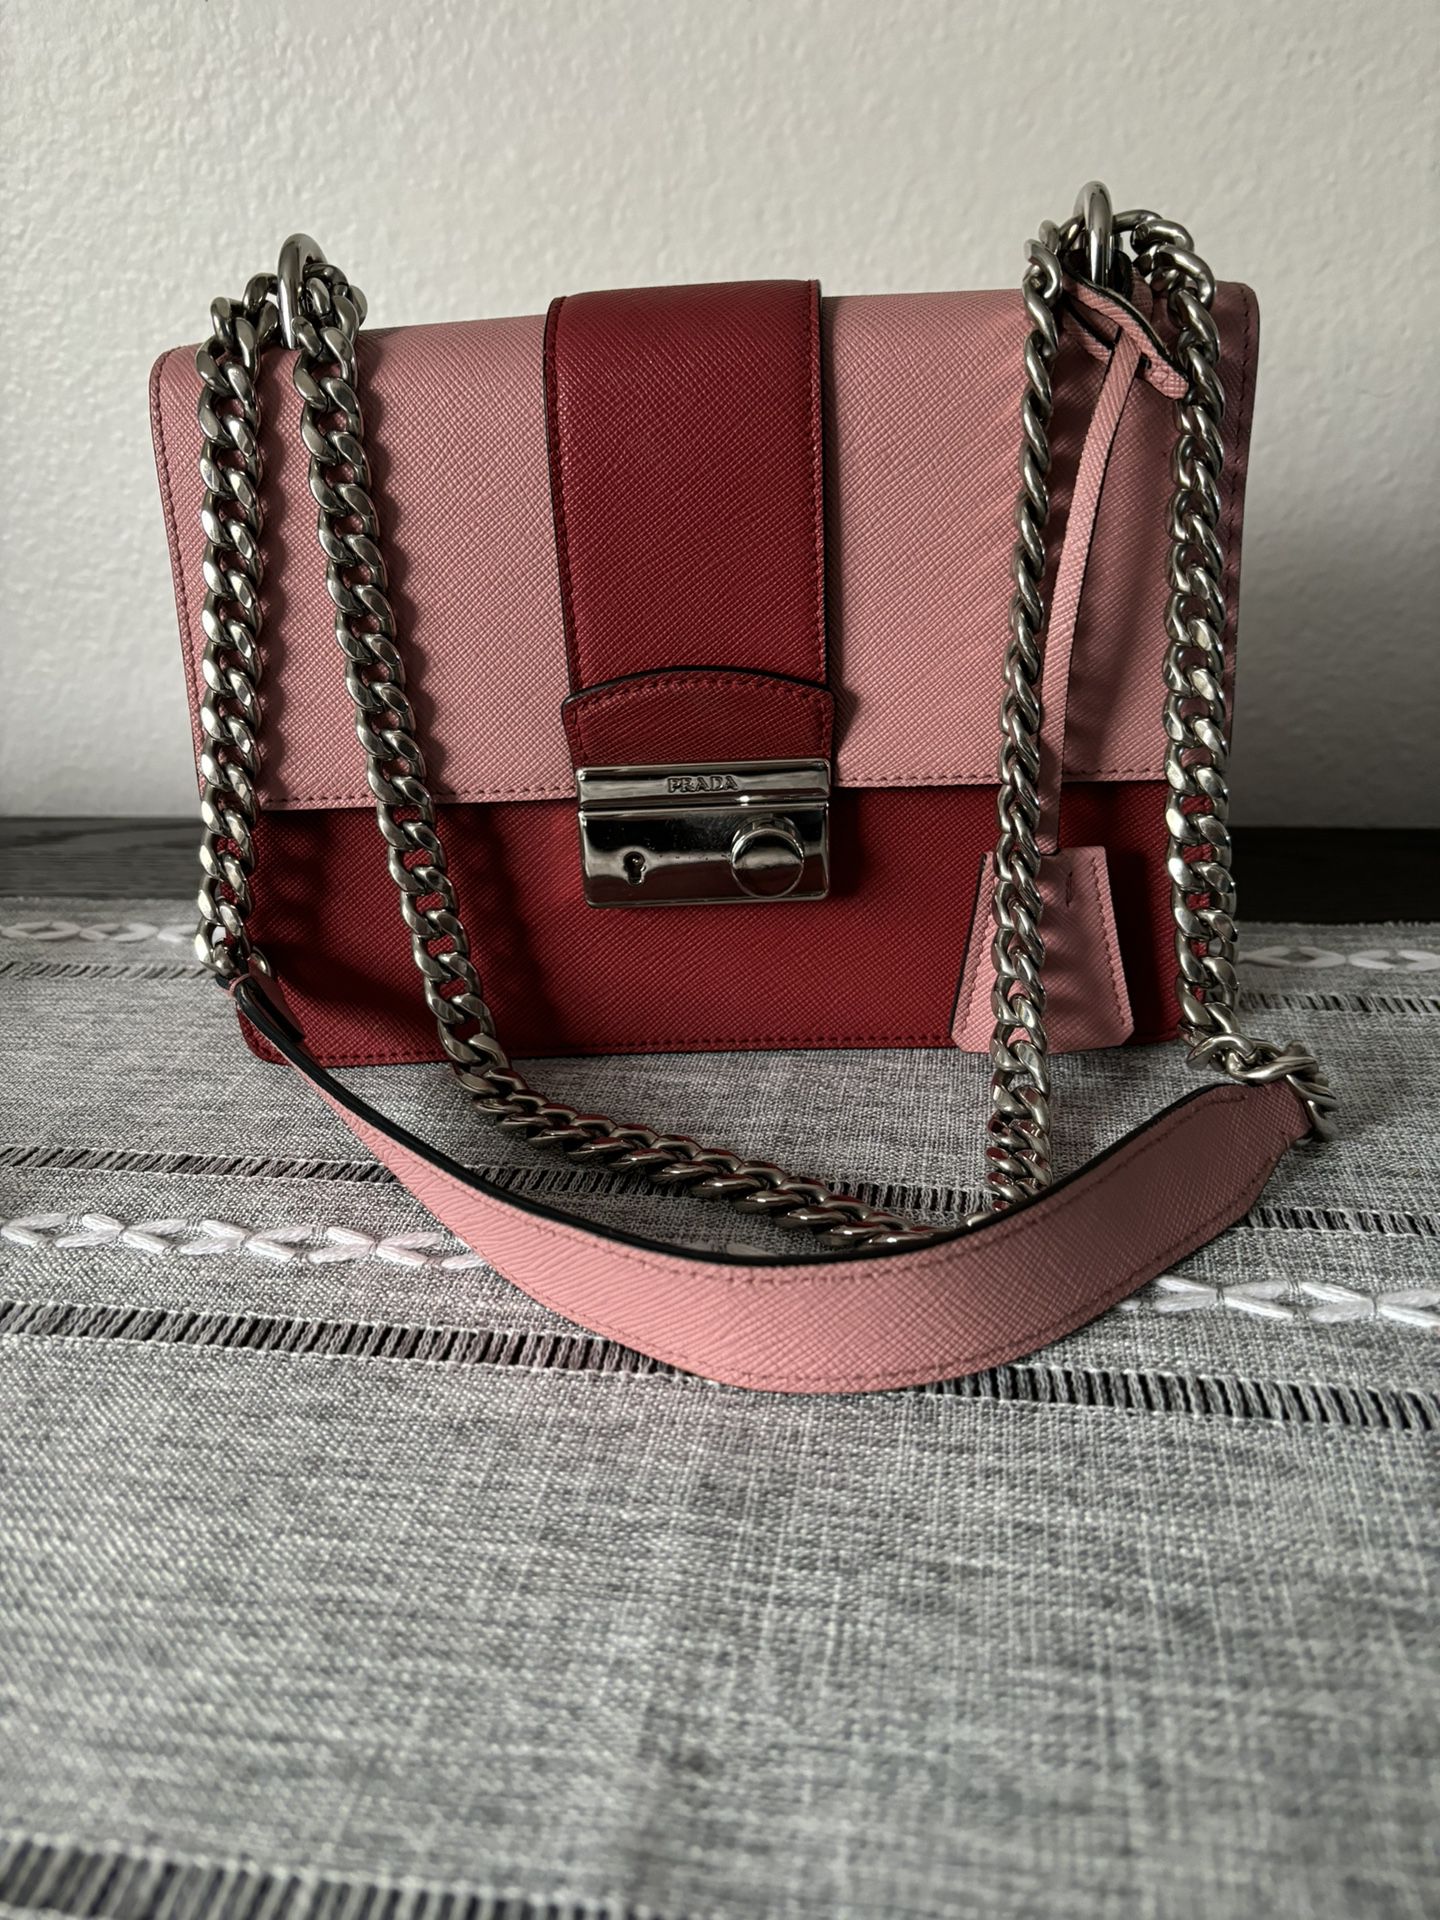 Prada Leather Chain Shoulder Bag Crossbody Pink And Red Lock And Key Mothers Day Gift